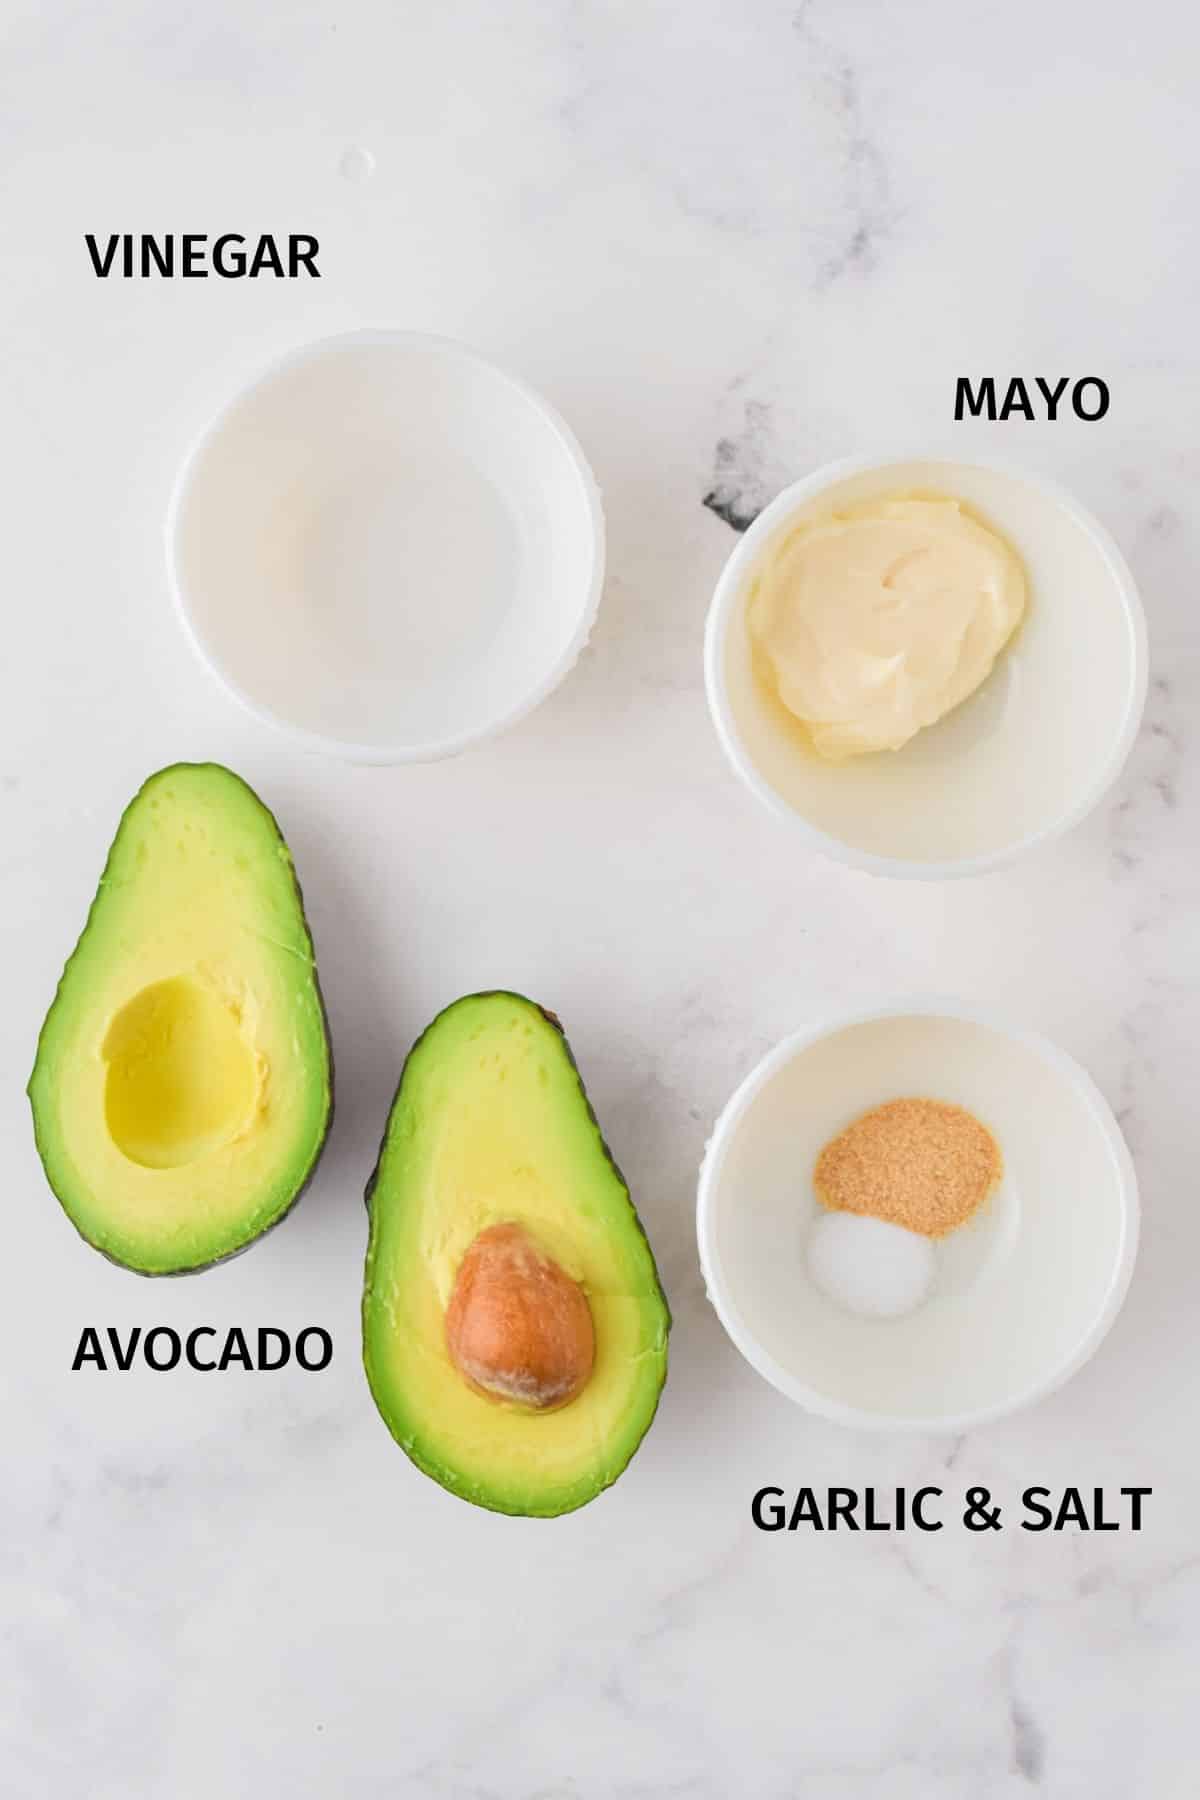 Ingredients for avocado spread set out on a white surface.